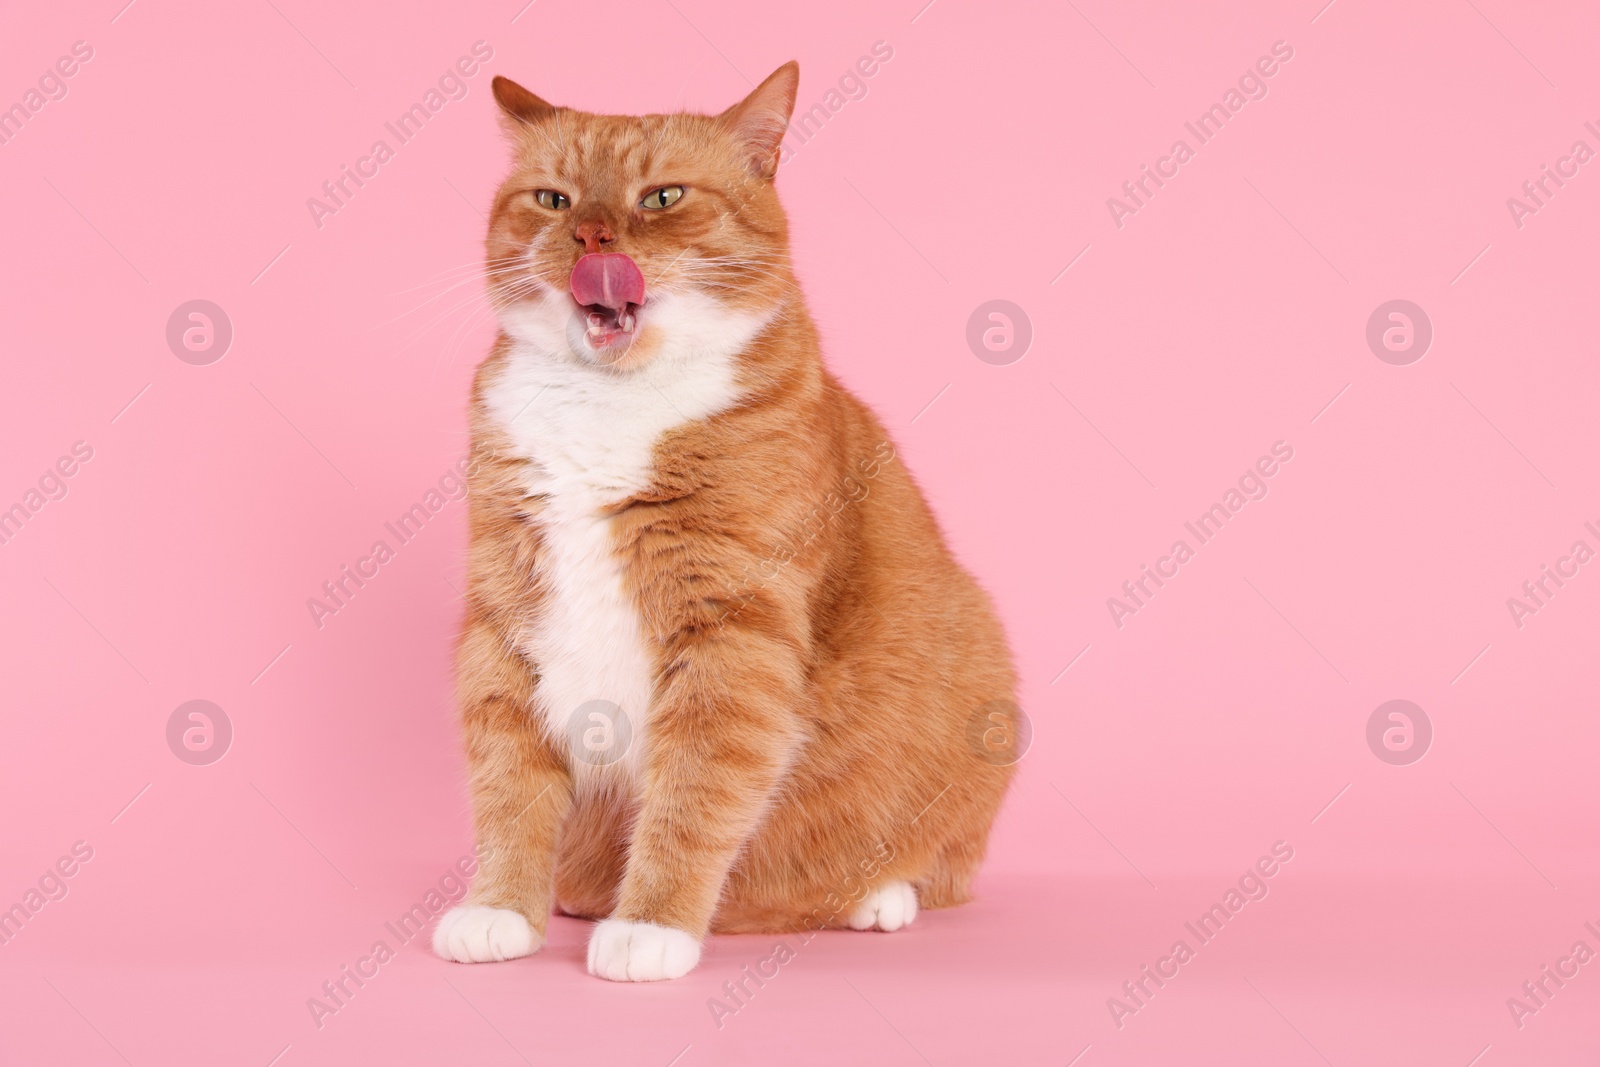 Photo of Cute cat licking itself on pink background